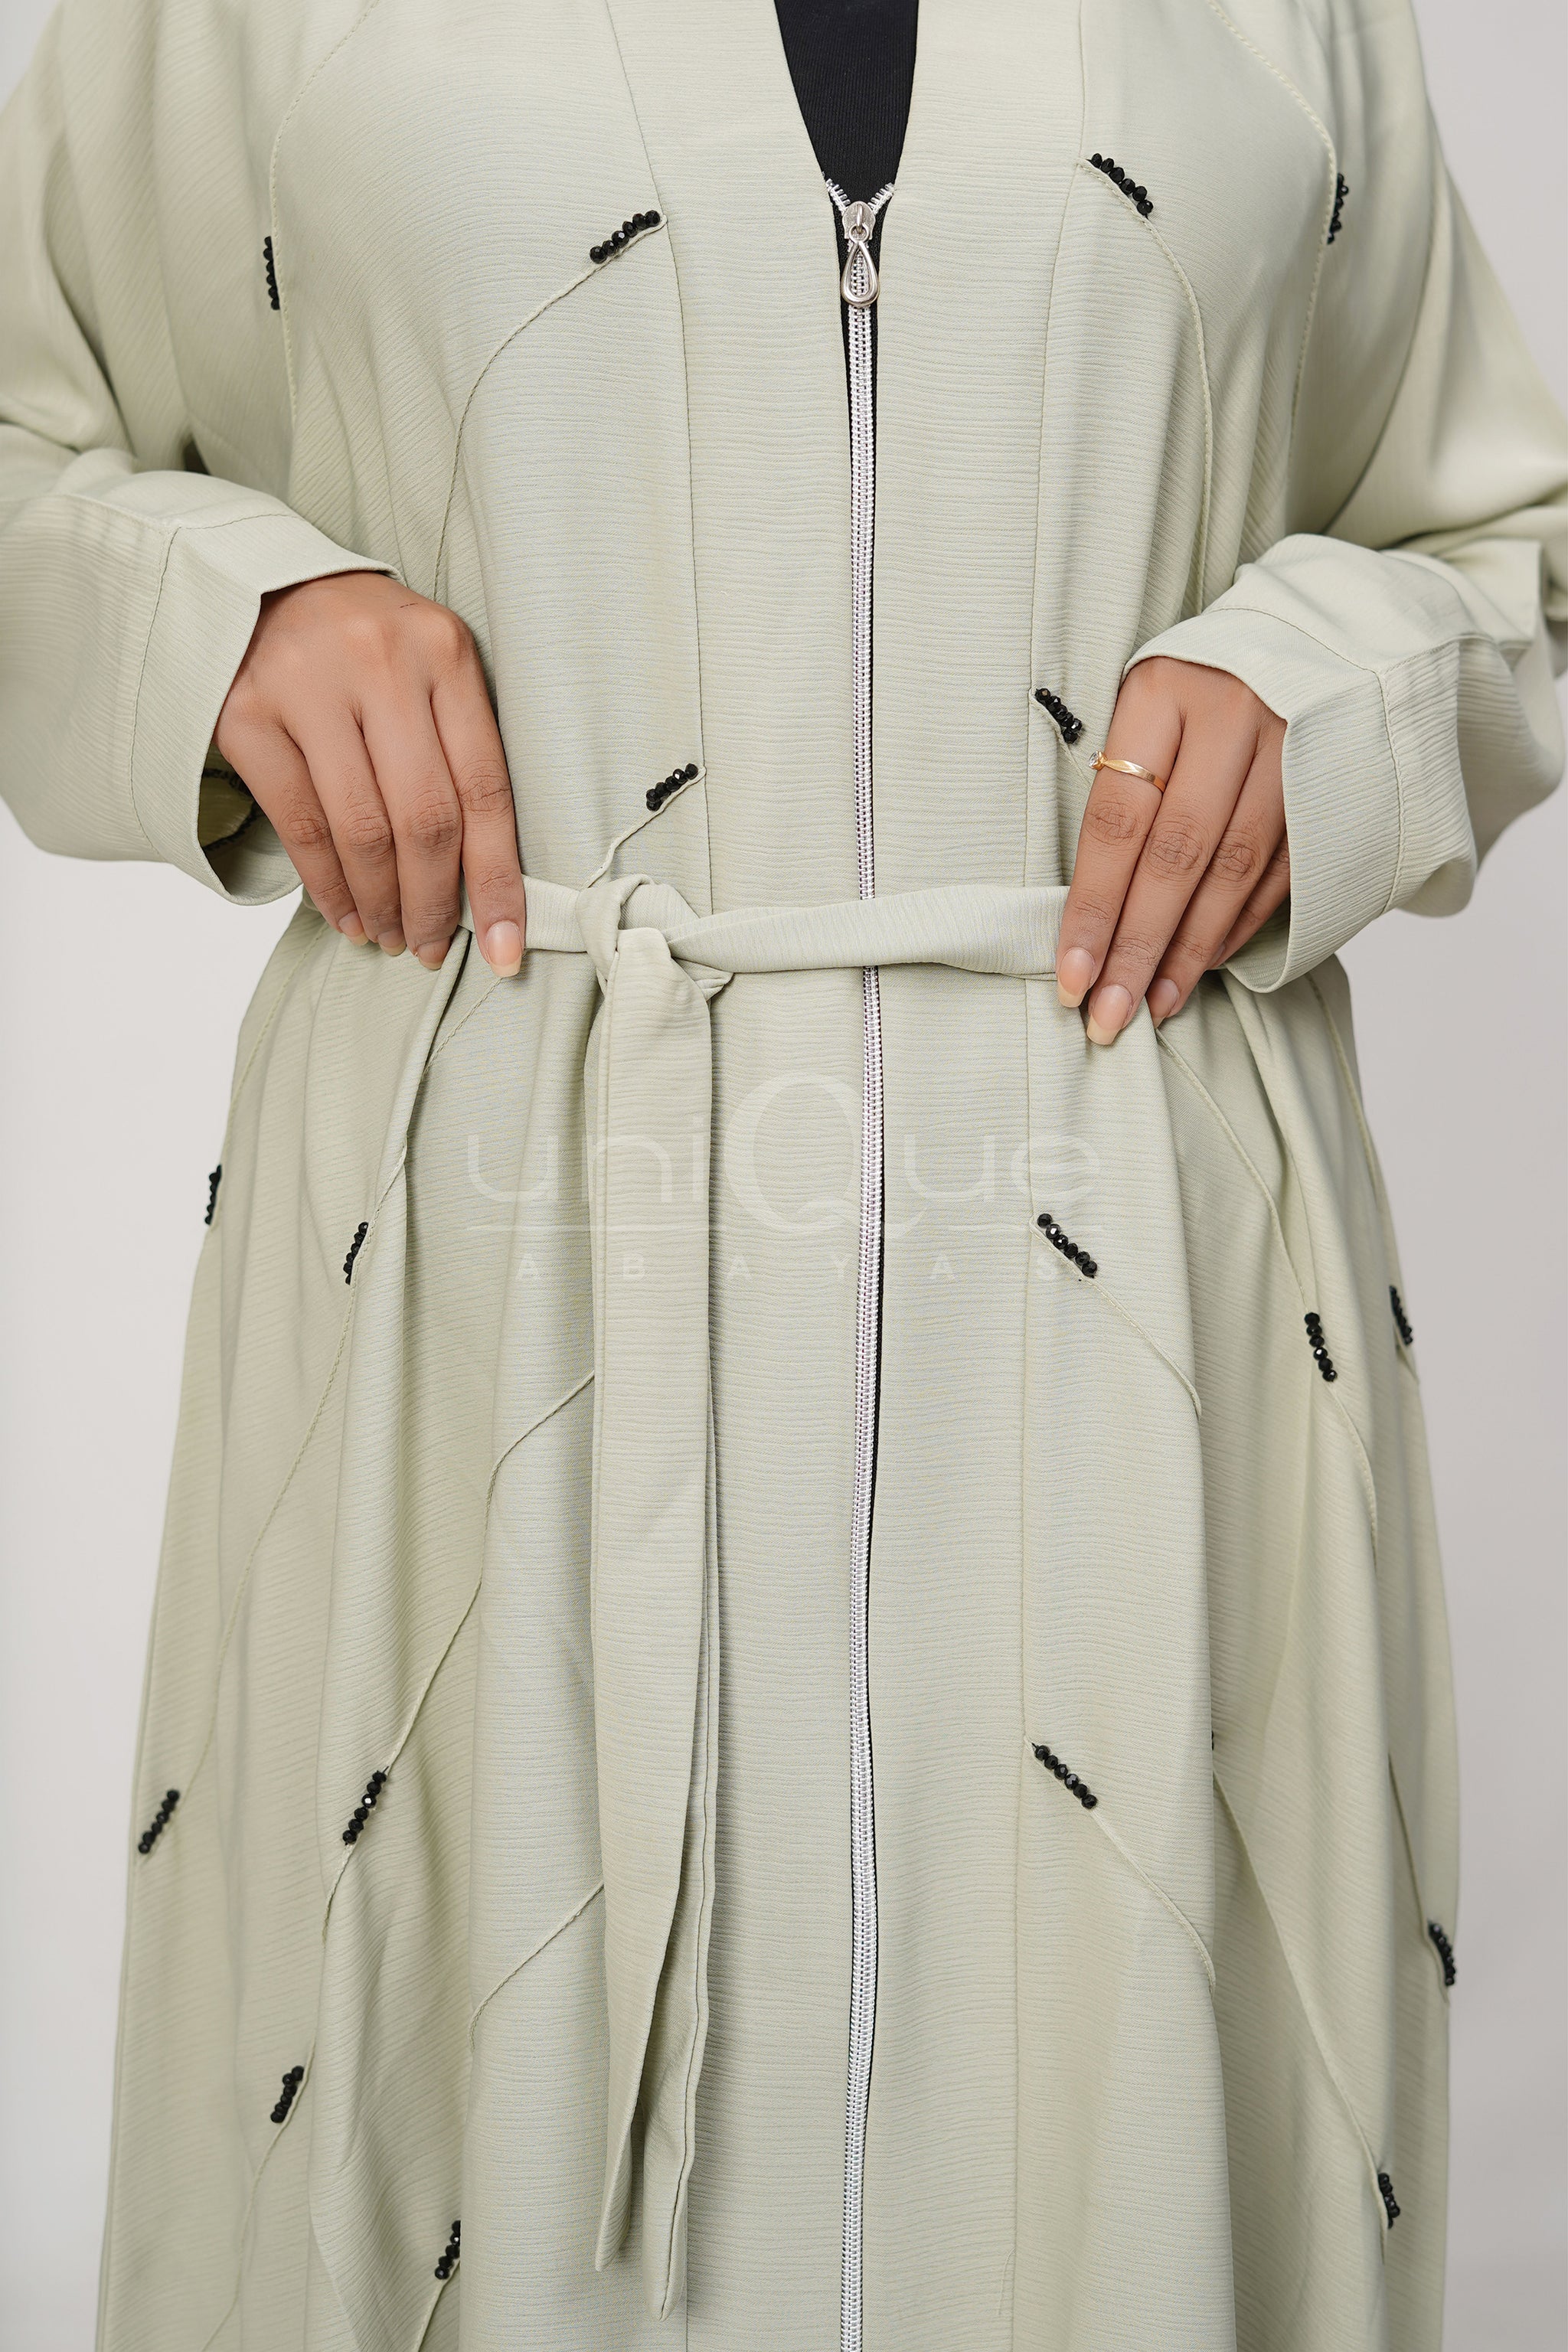 Full Zip Embellished Mint Abaya by Uniquewallart Abaya for Women, Front Side Close-Up Detailed